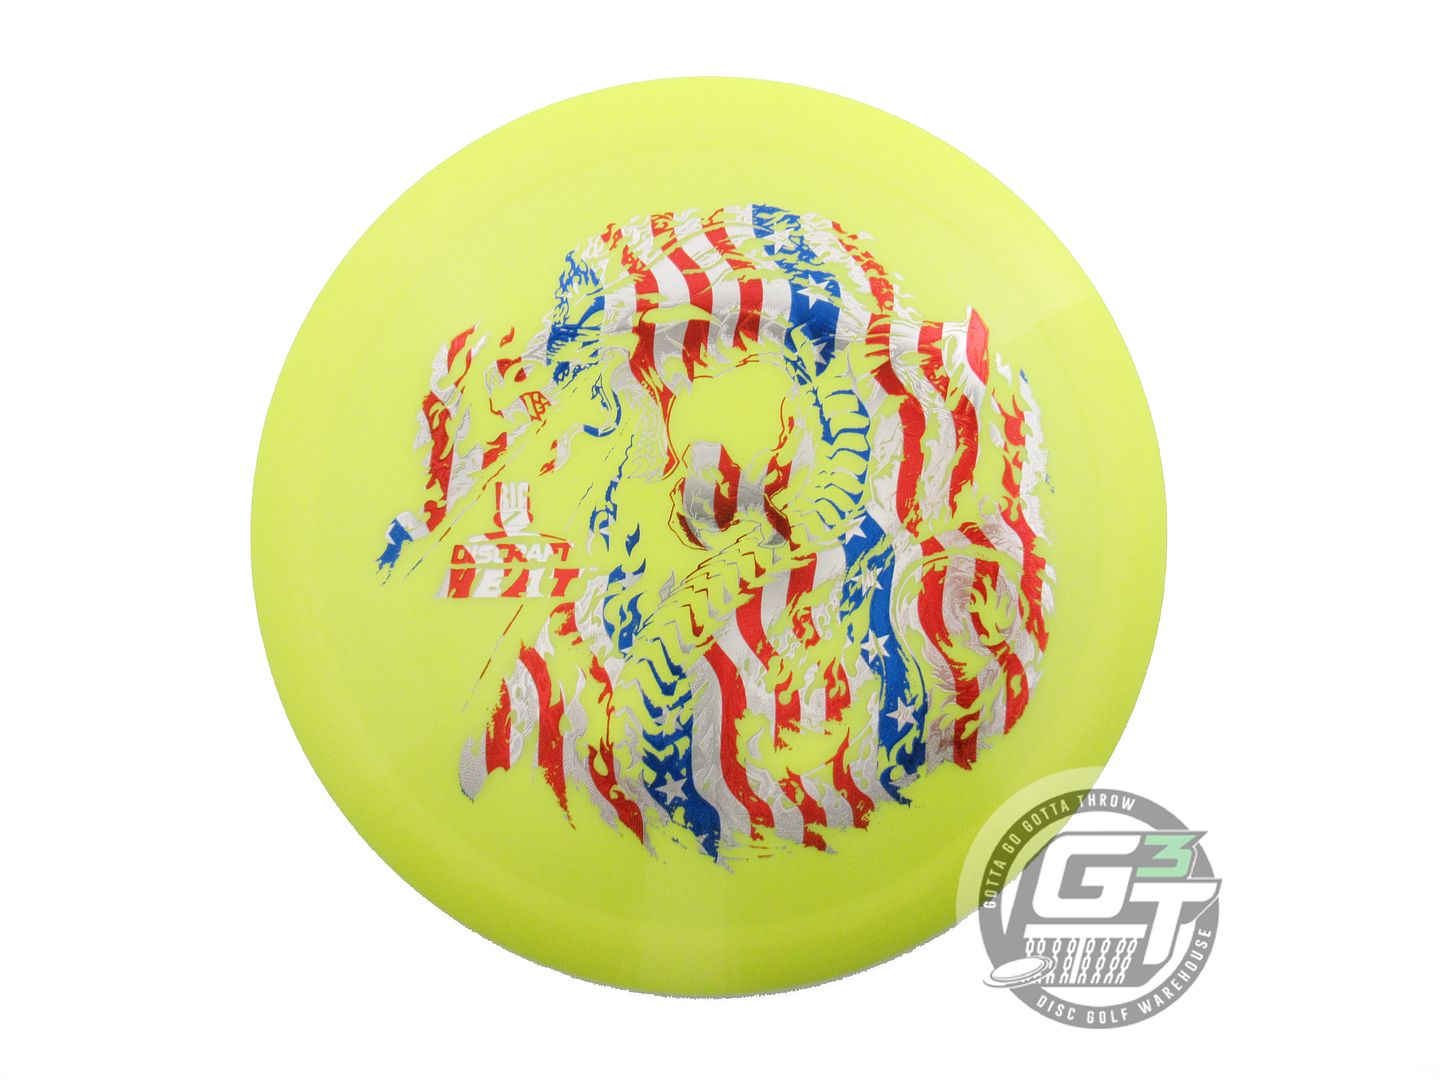 Discraft Big Z Heat Distance Driver Golf Disc (Individually Listed)